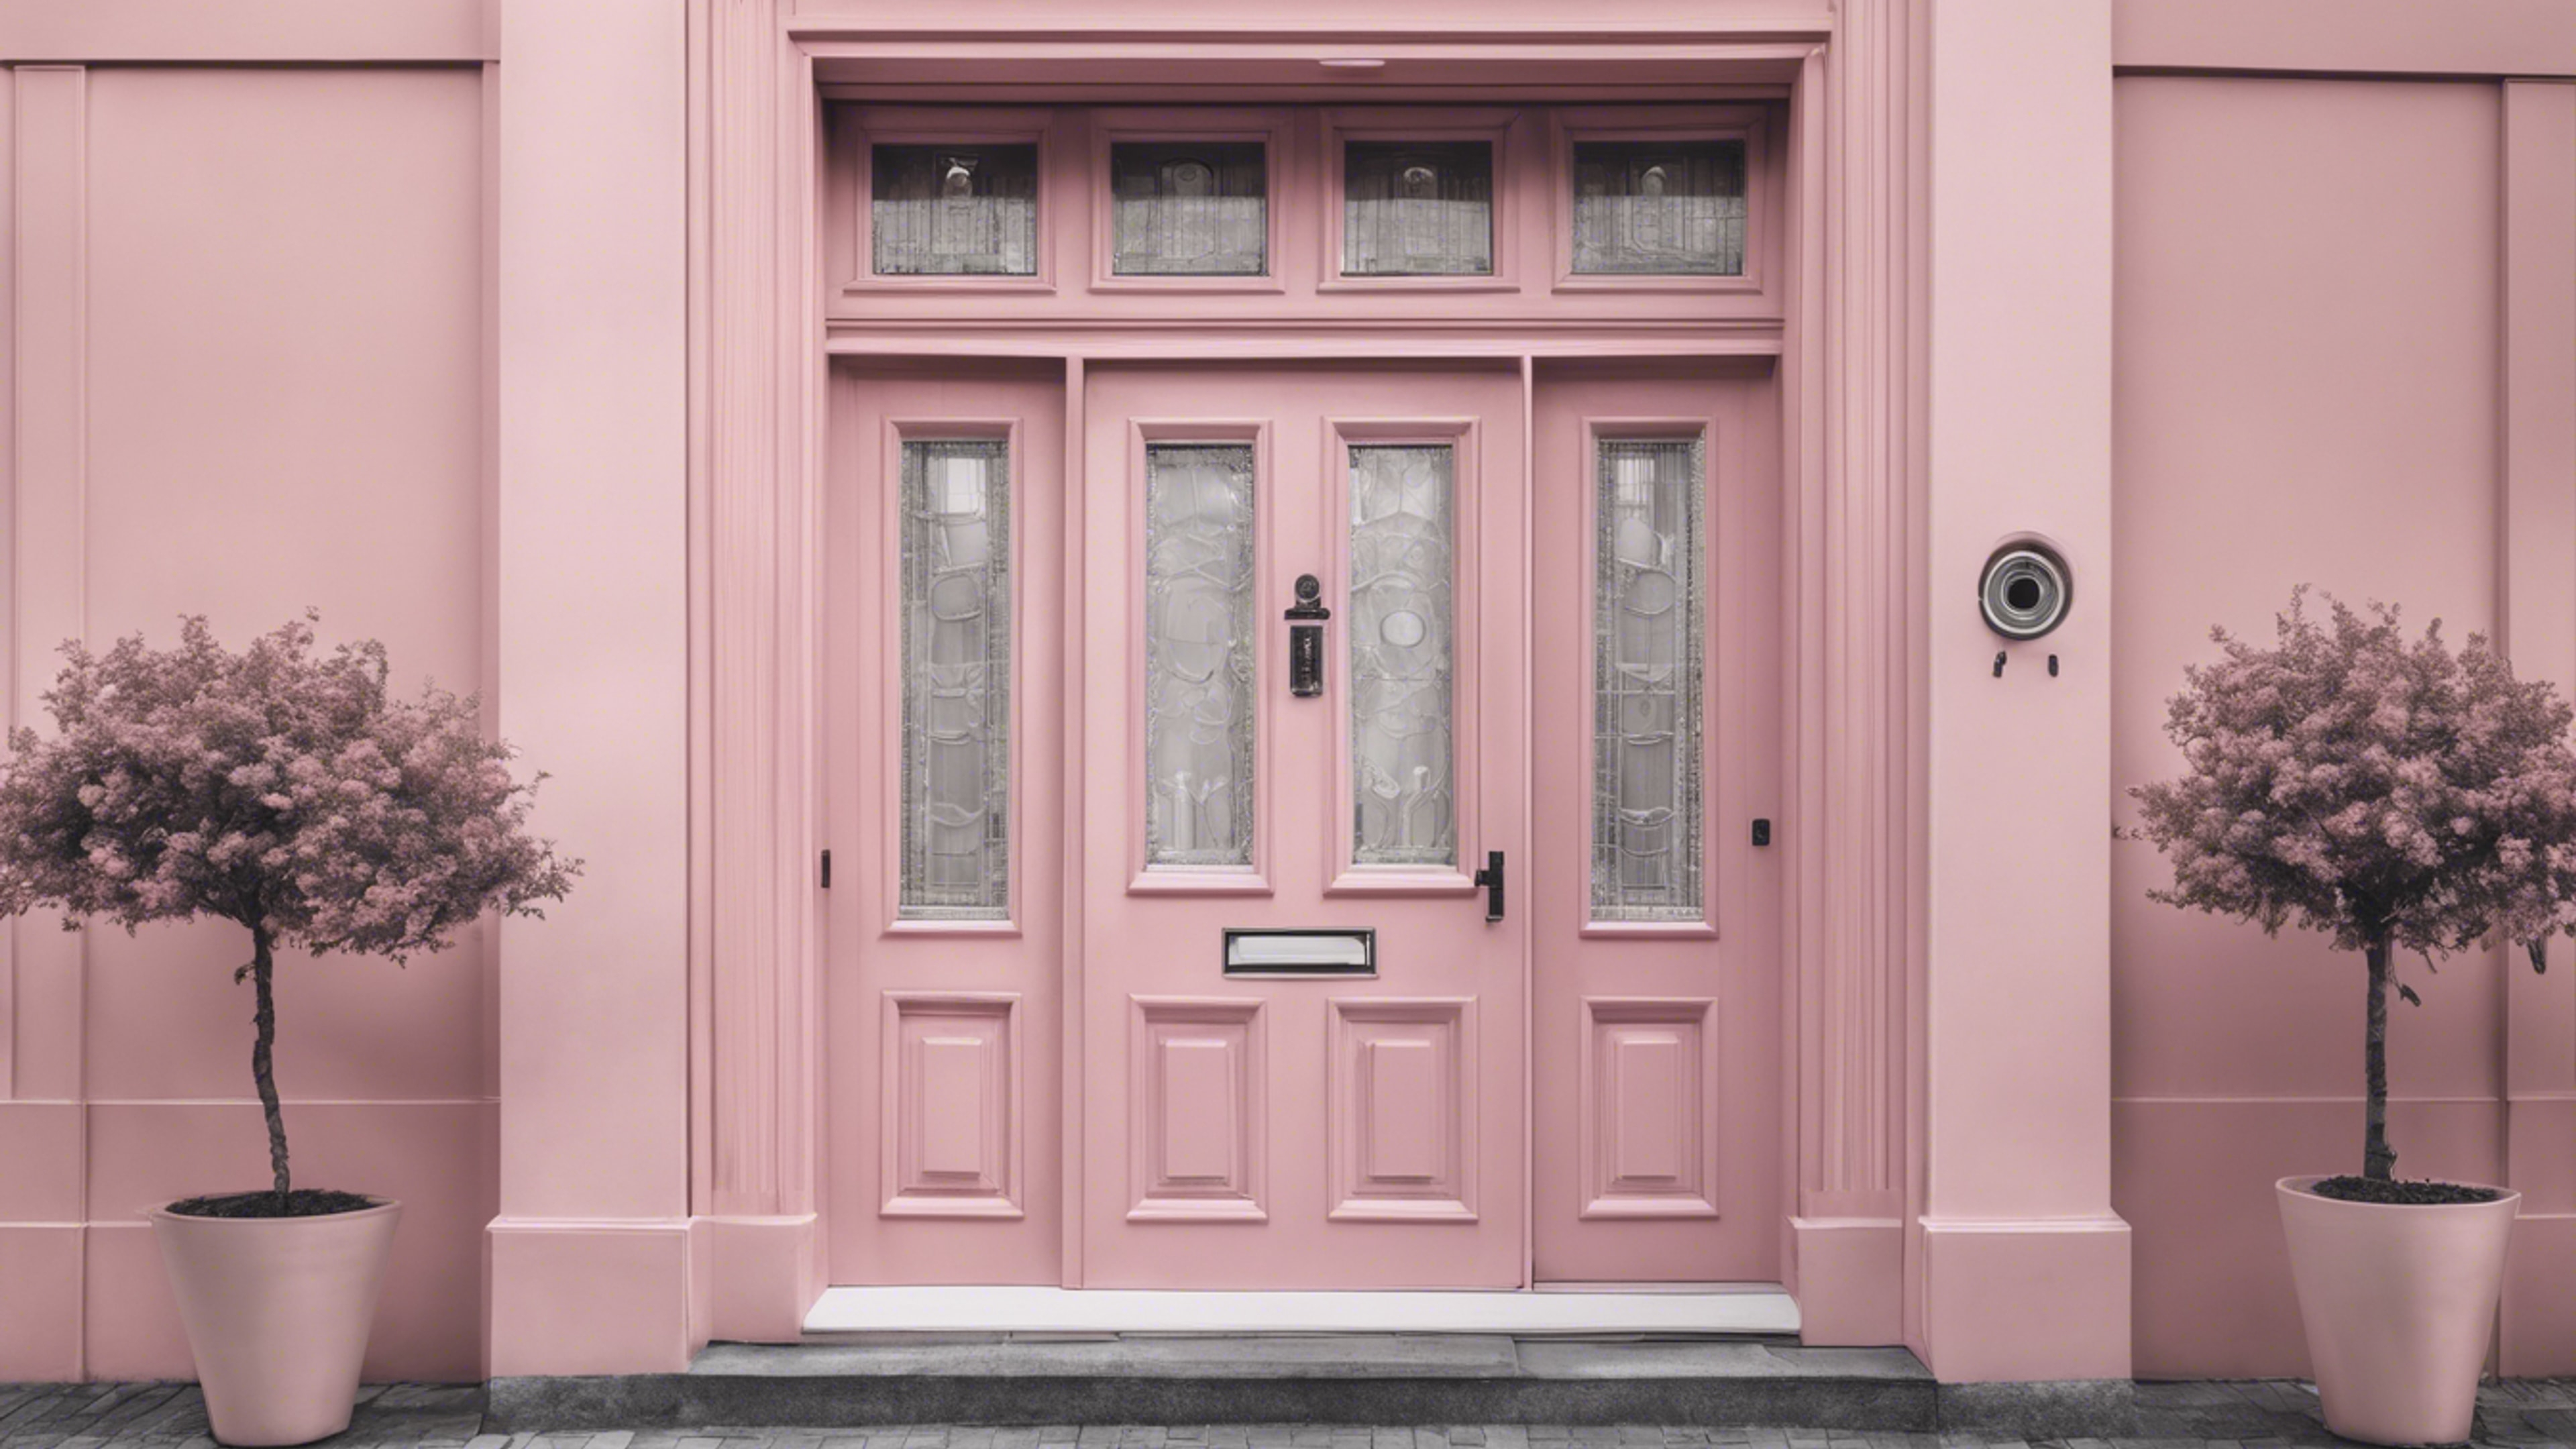 Monochrome image of a sophisticated townhouse door painted in a fetching preppy pastel pink.壁紙[a9cdce63c1c94c029691]